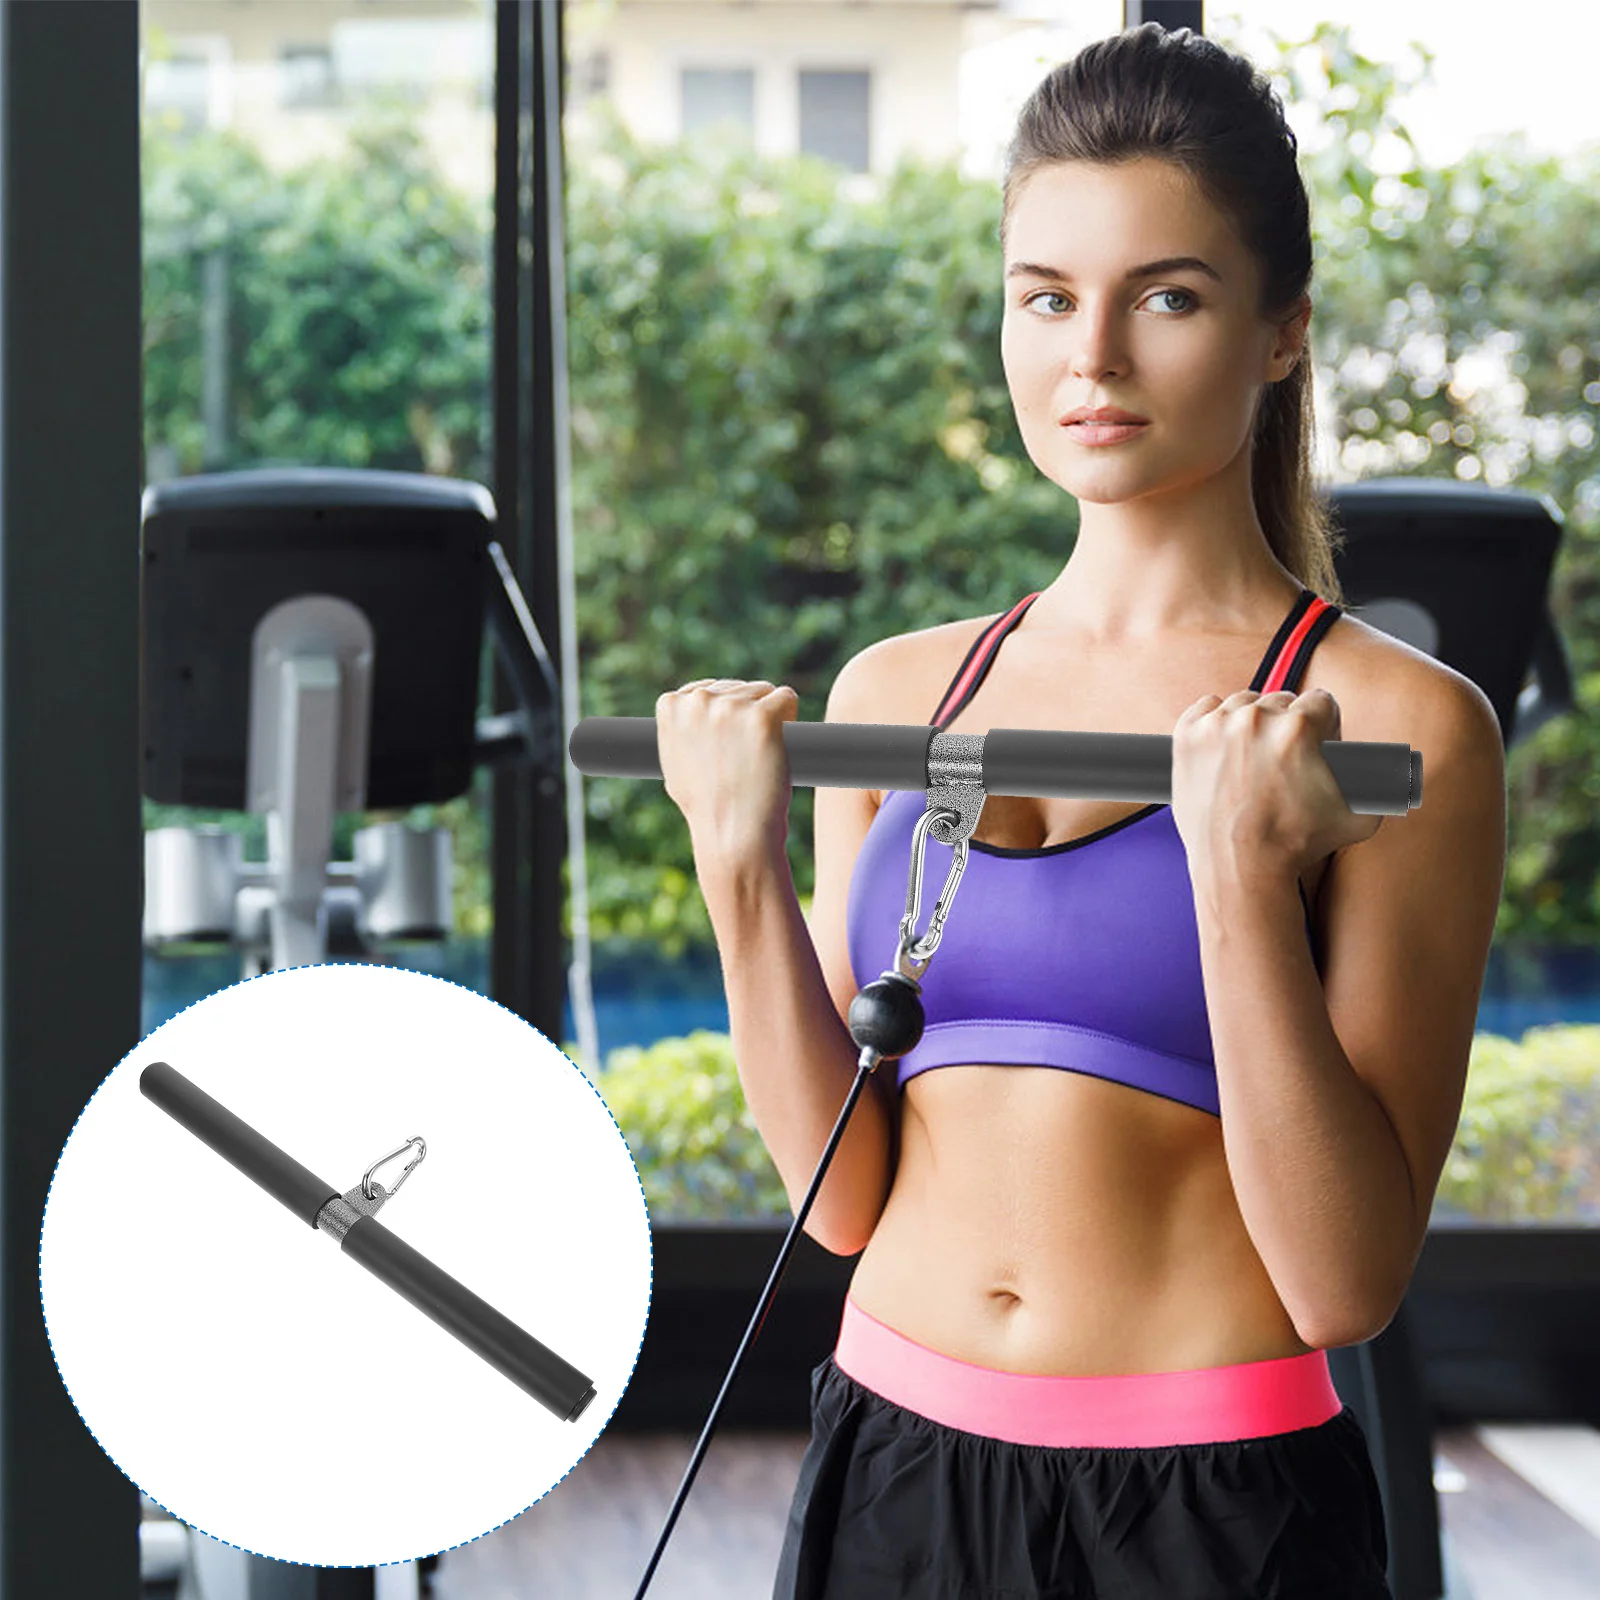 

DIY Rotating Straight Bar Attachment for Rowing Exercises Fitness Gym Arm Shoulder Muscles, Row Bar LAT Pulldown Bar Attachment